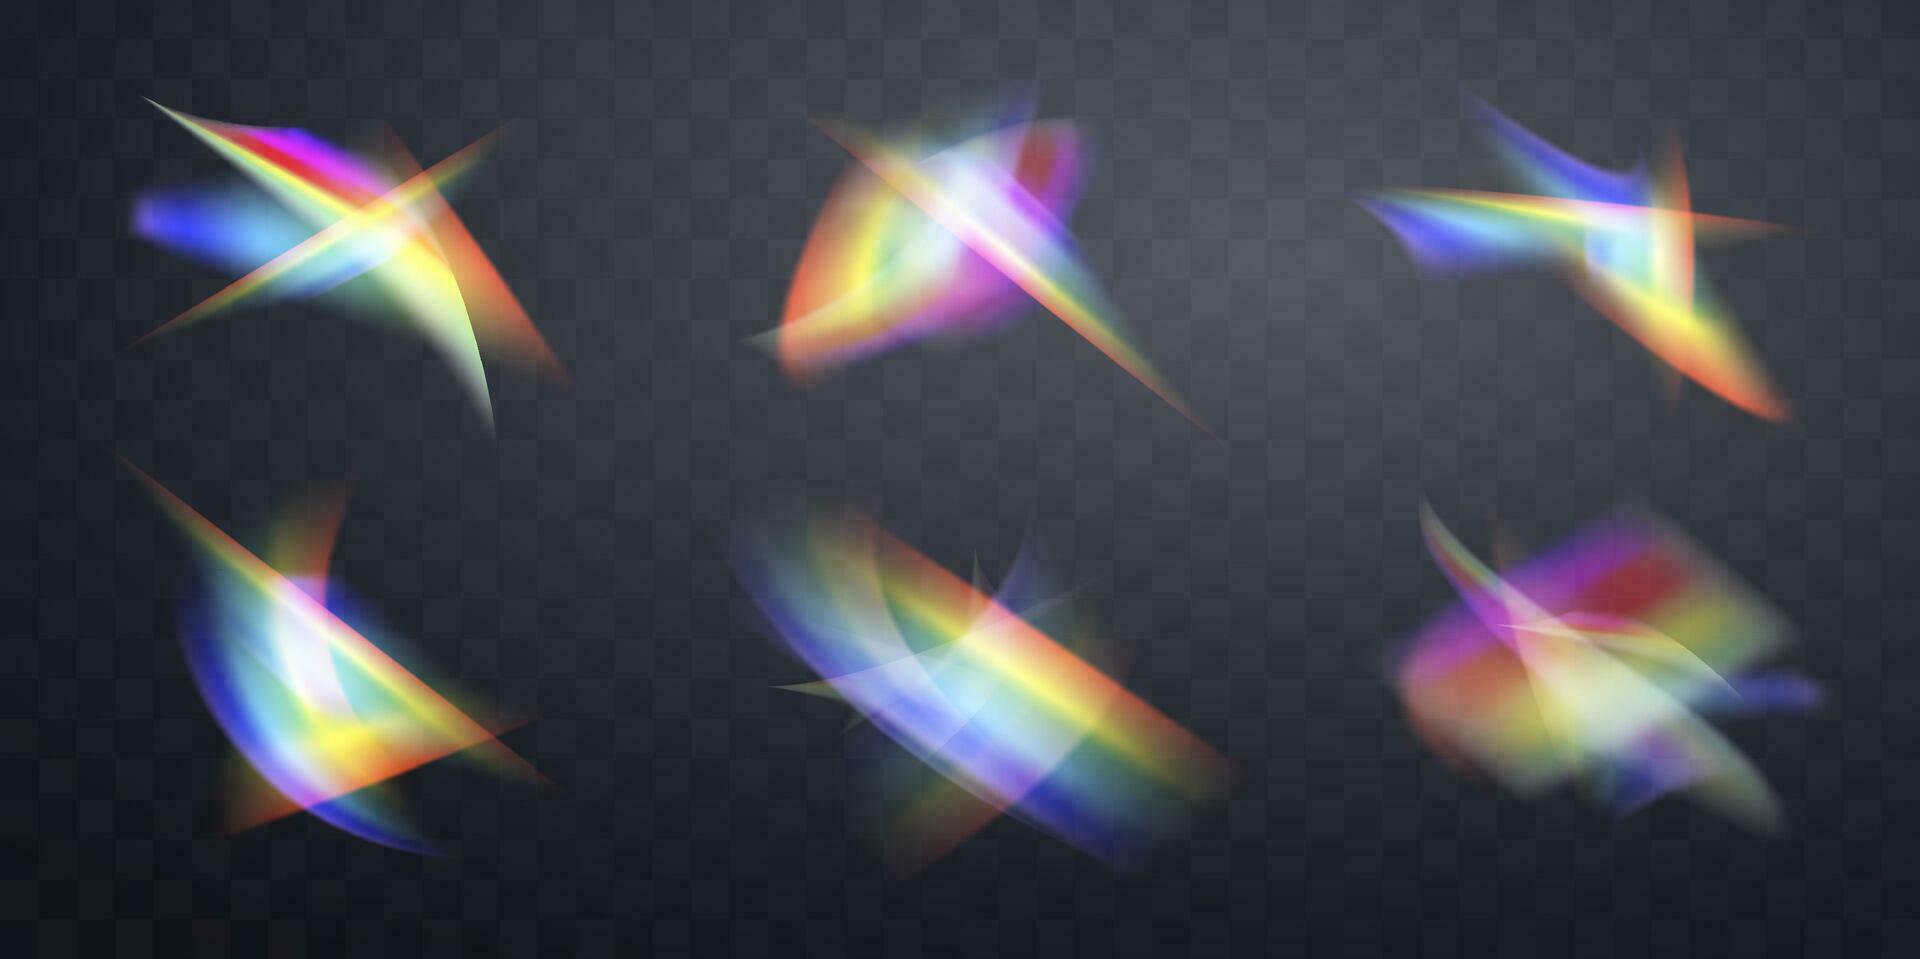 Blurred rainbow refraction overlay effect set. Light lens prism effect. Holographic reflection, crystal flare leak shadow overlay. Vector abstract illustration.